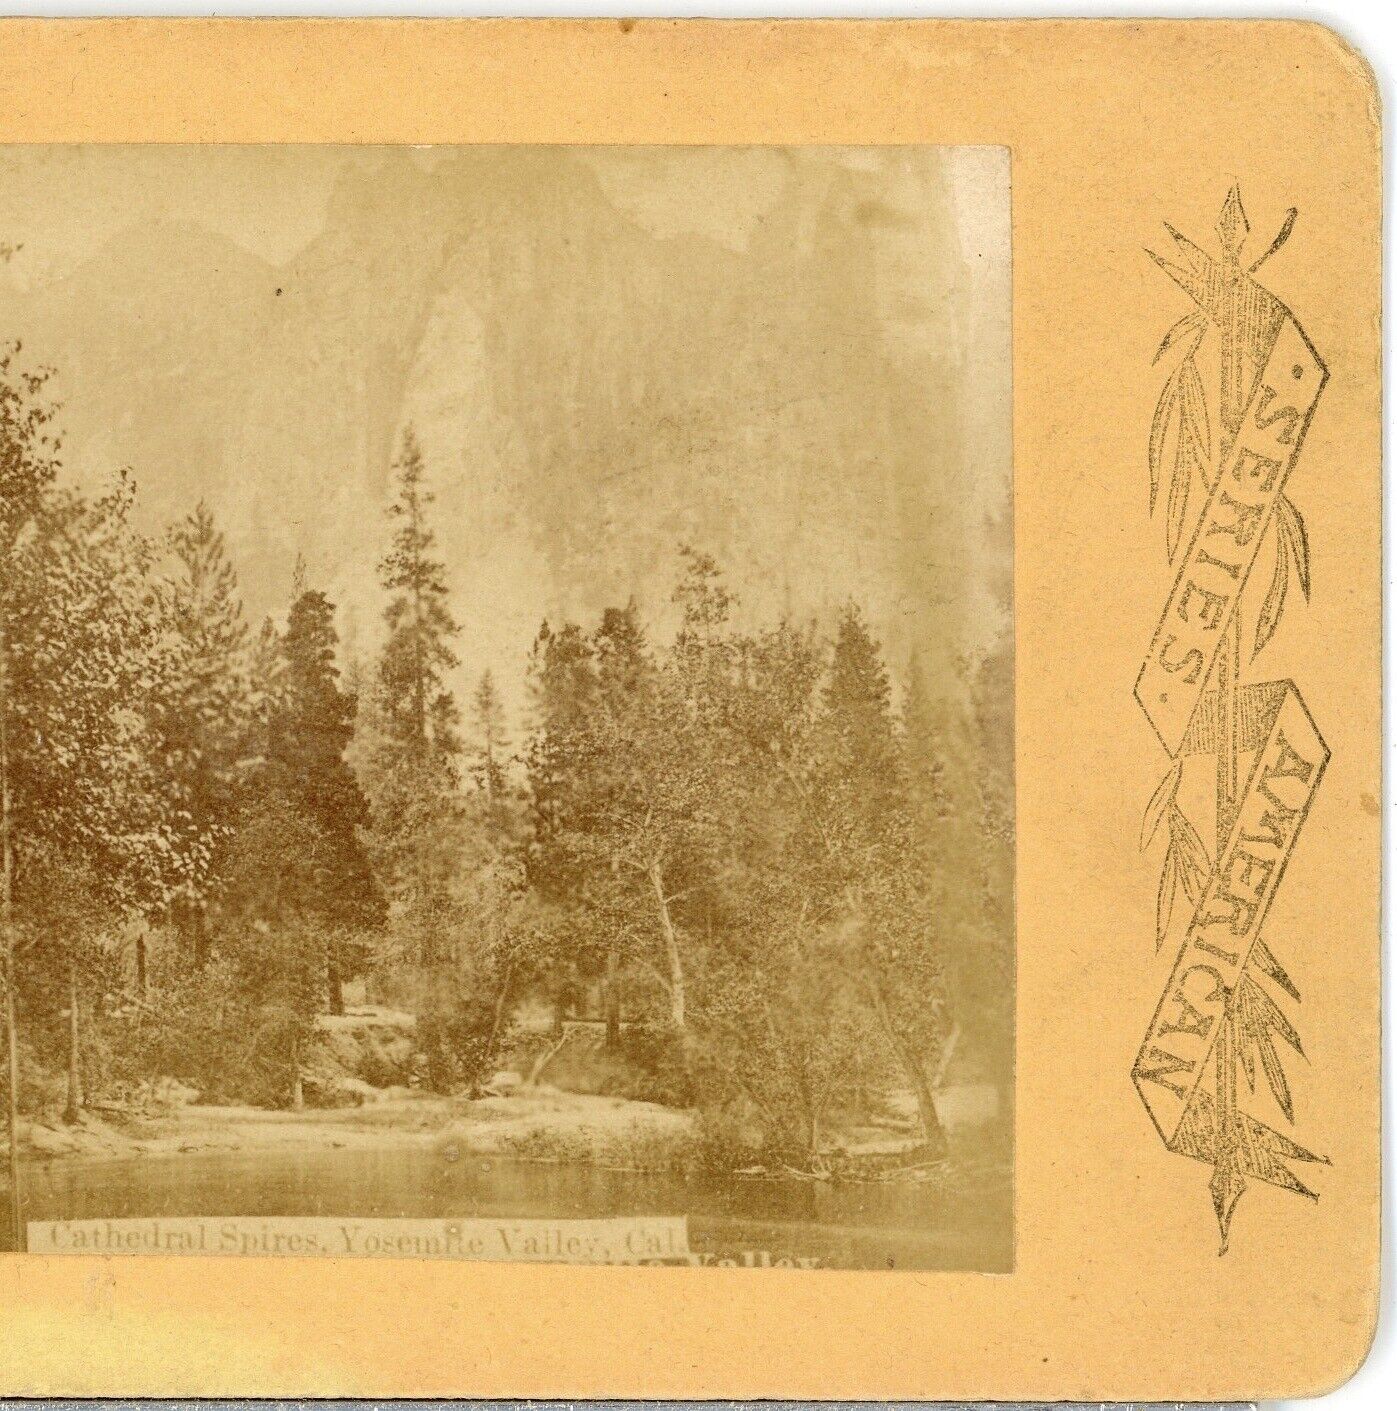 CALIFORNIA, Cathedral Spires, Yosemite Valley--American Series Stereoview G111